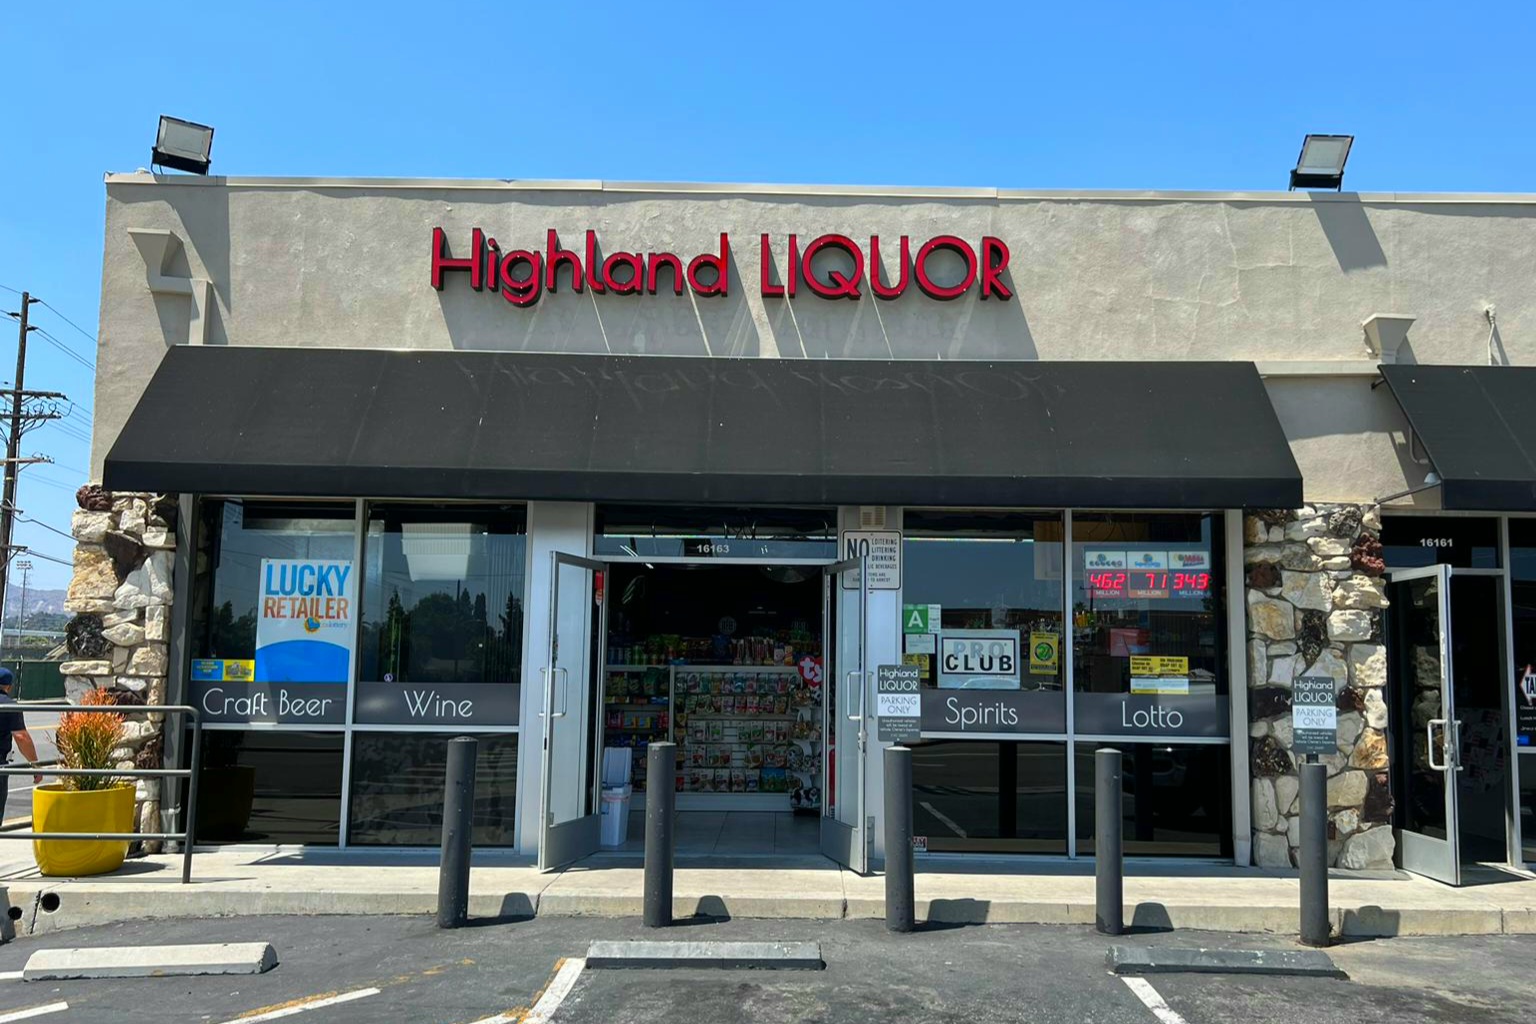 Spirits & Cheers - Highland Liquor! Channel Letters Sign